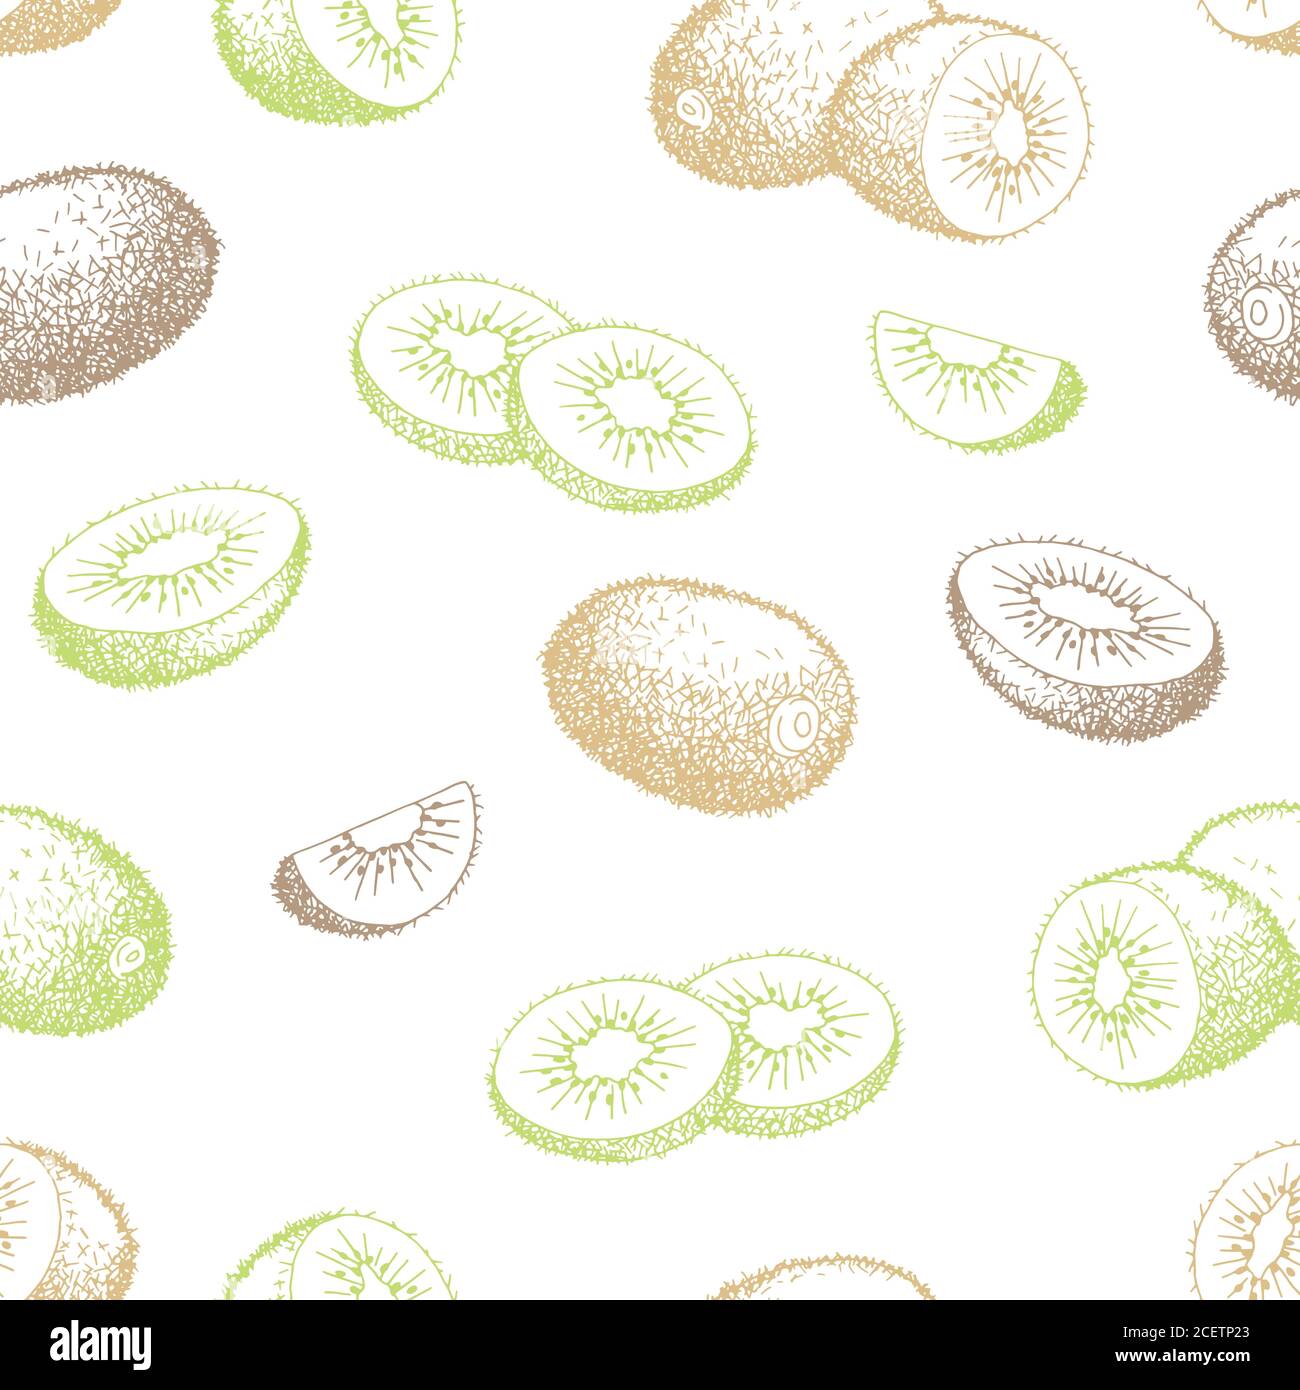 Kiwi fruit graphic color seamless pattern sketch illustration vector Stock Vector